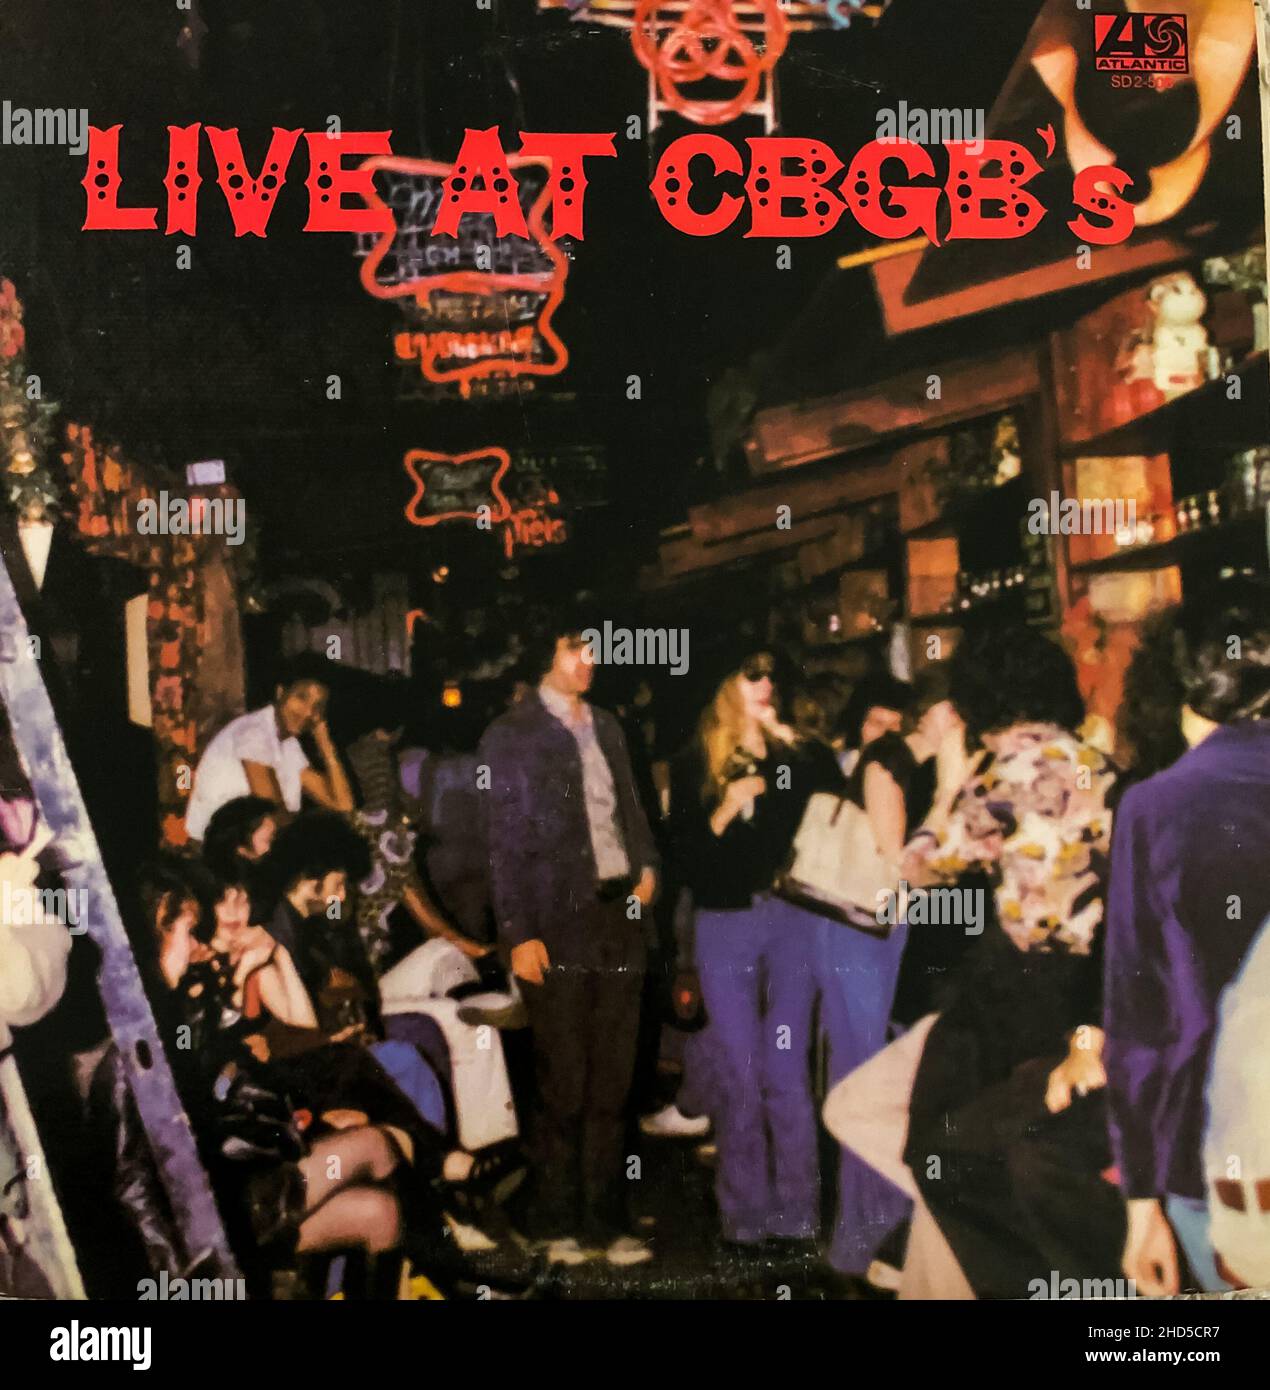 New York, NY, Punk Rock Anthology Album Cover, 'Live at CBGB's' punks, YOUTH CULTURE 1970s, classic rock vinyl albums, vintage covers Stock Photo